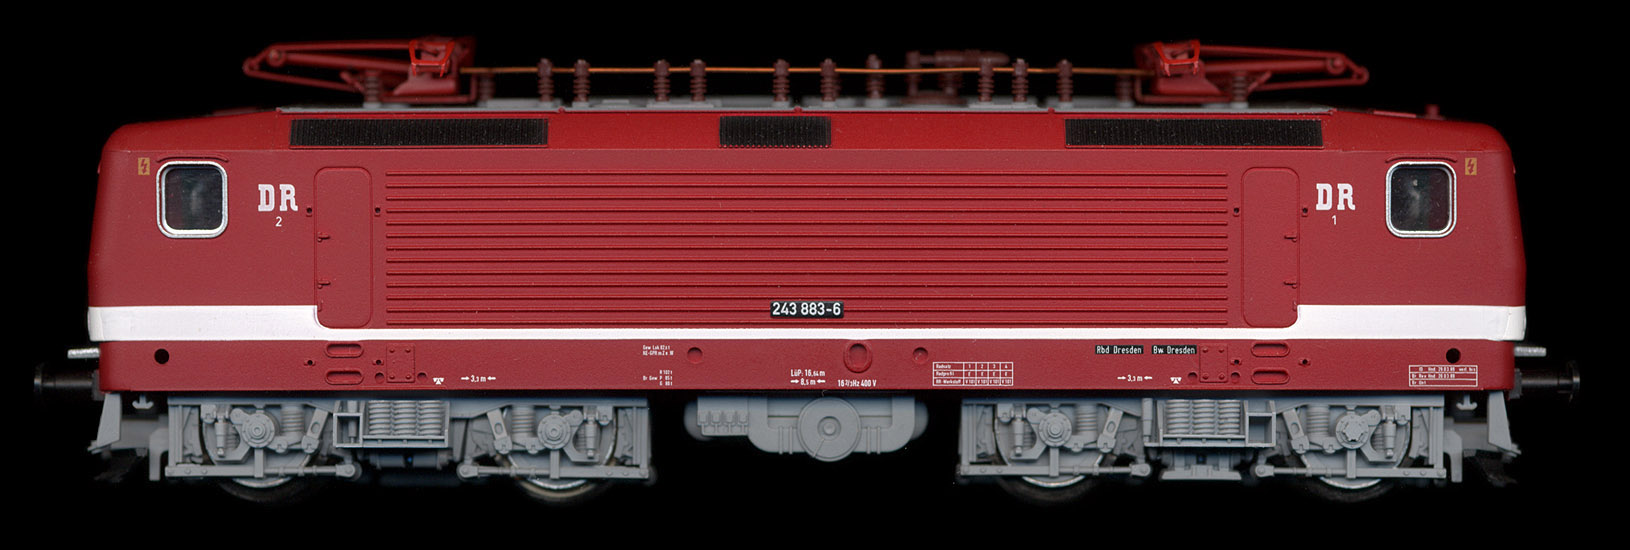 BR 243 883-6